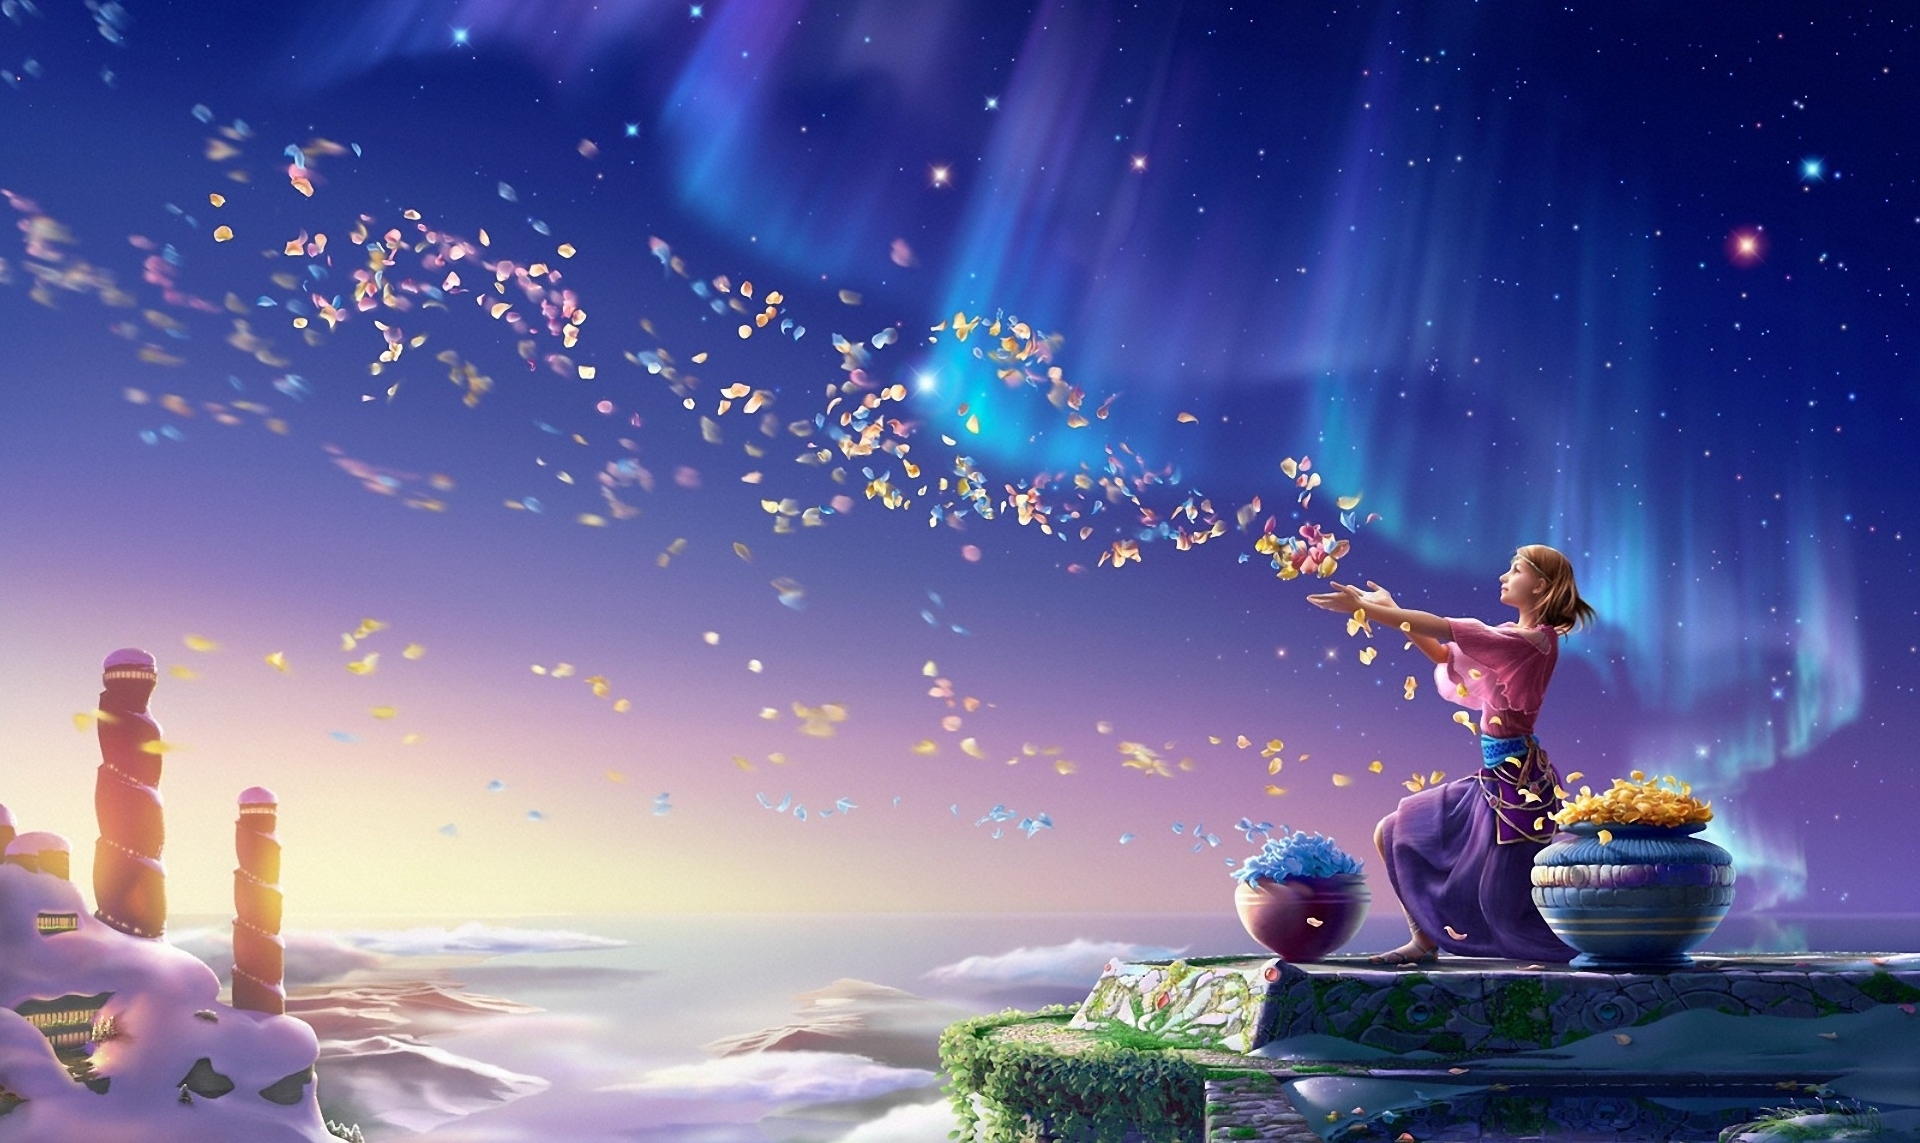 moving wallpapers for girls,sky,cg artwork,animation,illustration,fictional character